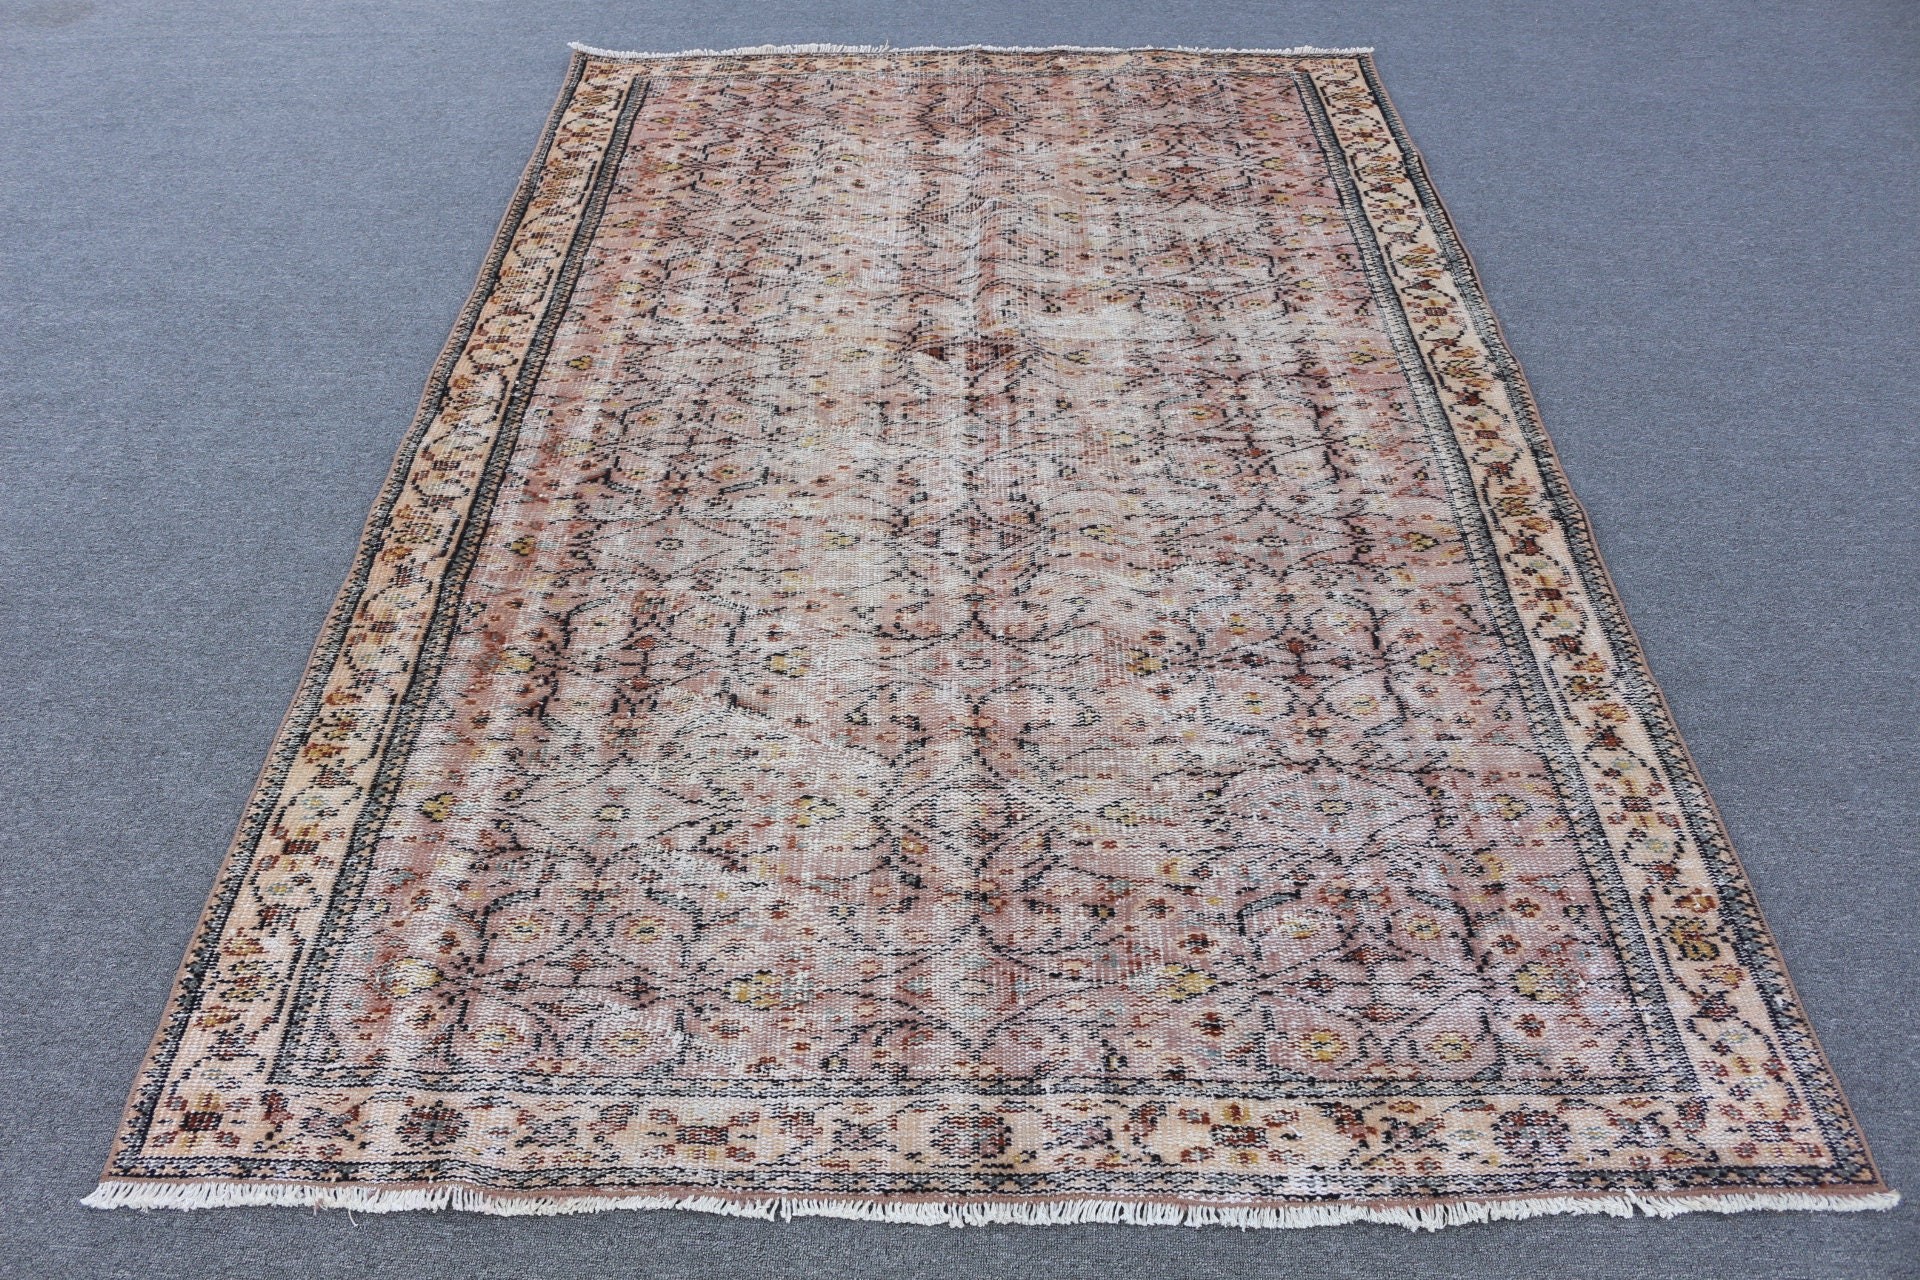 Living Room Rug, Vintage Rugs, Brown Kitchen Rug, 5.3x8.1 ft Large Rugs, Bright Rugs, Oushak Rug, Turkish Rugs, Salon Rugs, Antique Rugs